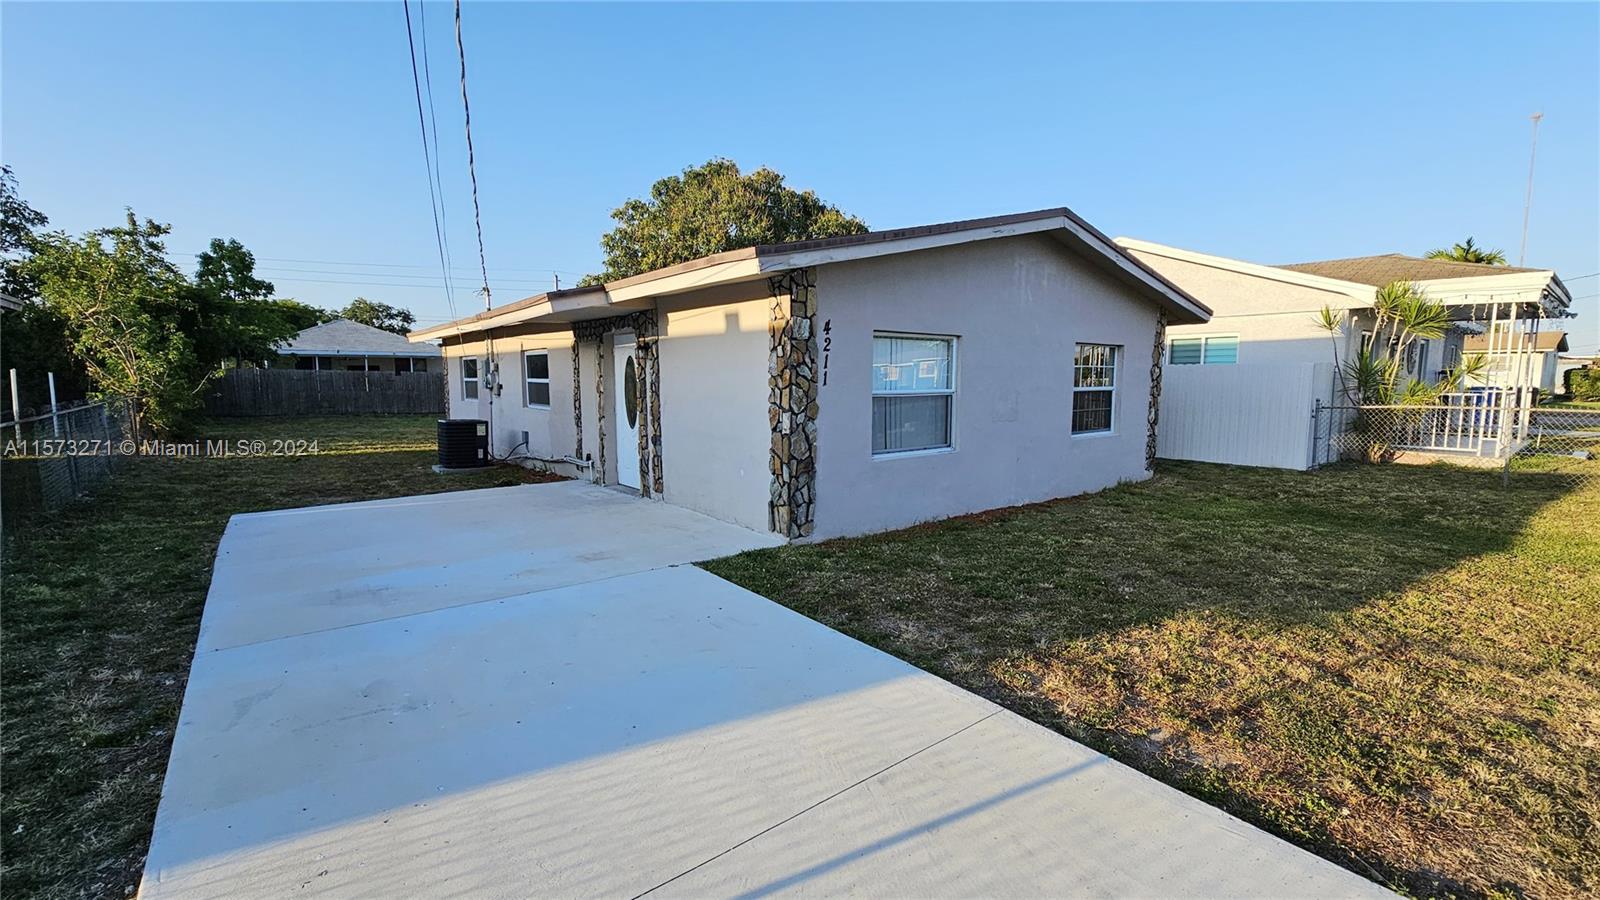 4211 SW 21st St, West Park, Florida 33023, 3 Bedrooms Bedrooms, ,1 BathroomBathrooms,Residential,For Sale,4211 SW 21st St,A11573271